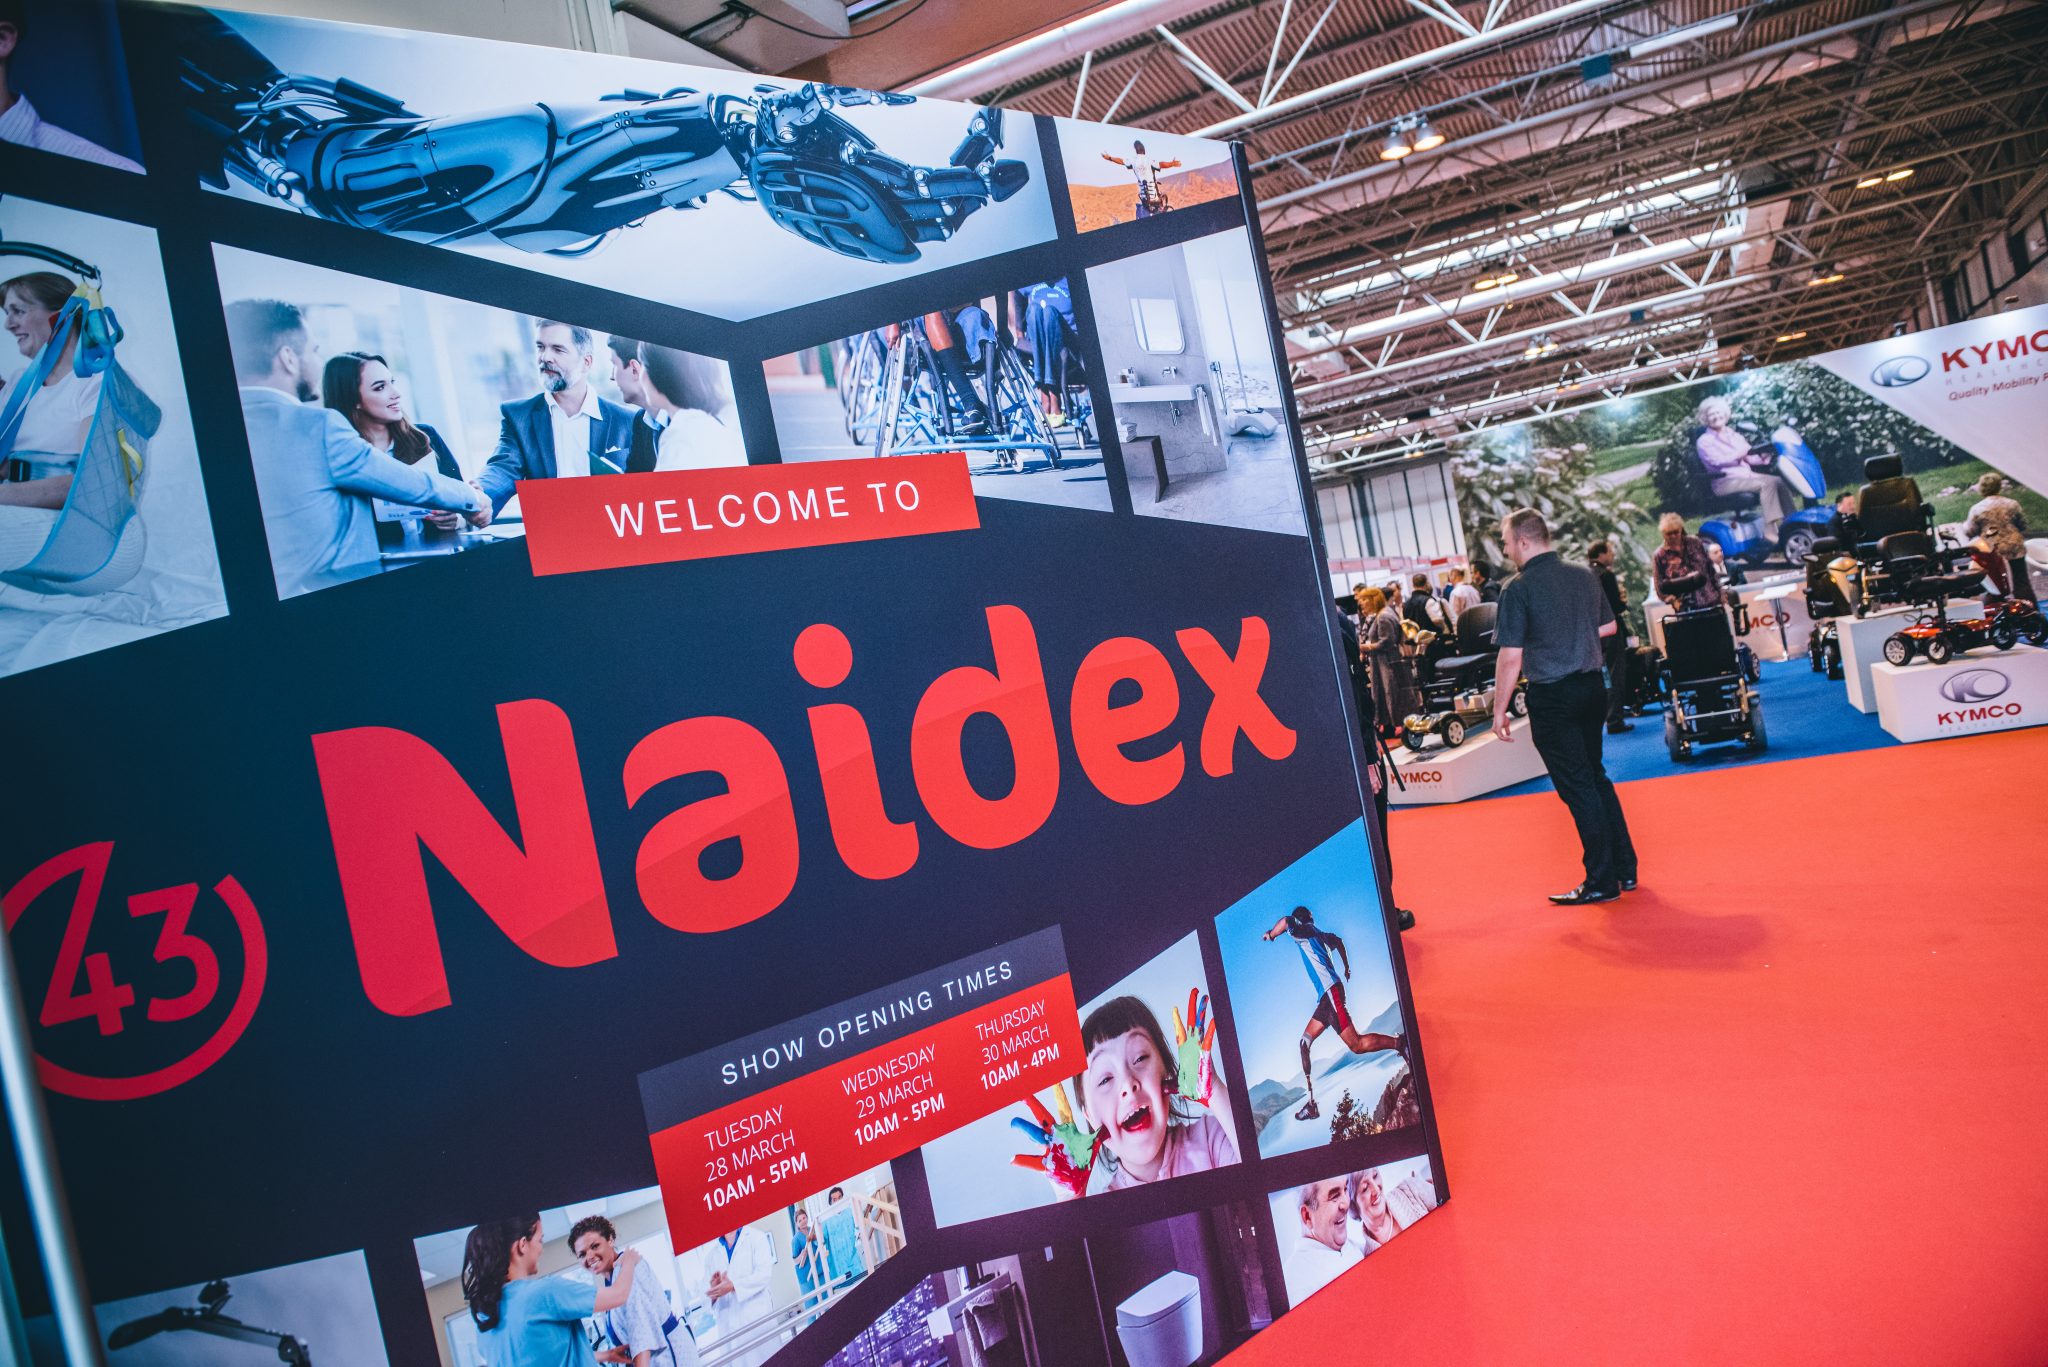 Accessibility and Inclusion – The Future of the Built Environment at Naidex 2018